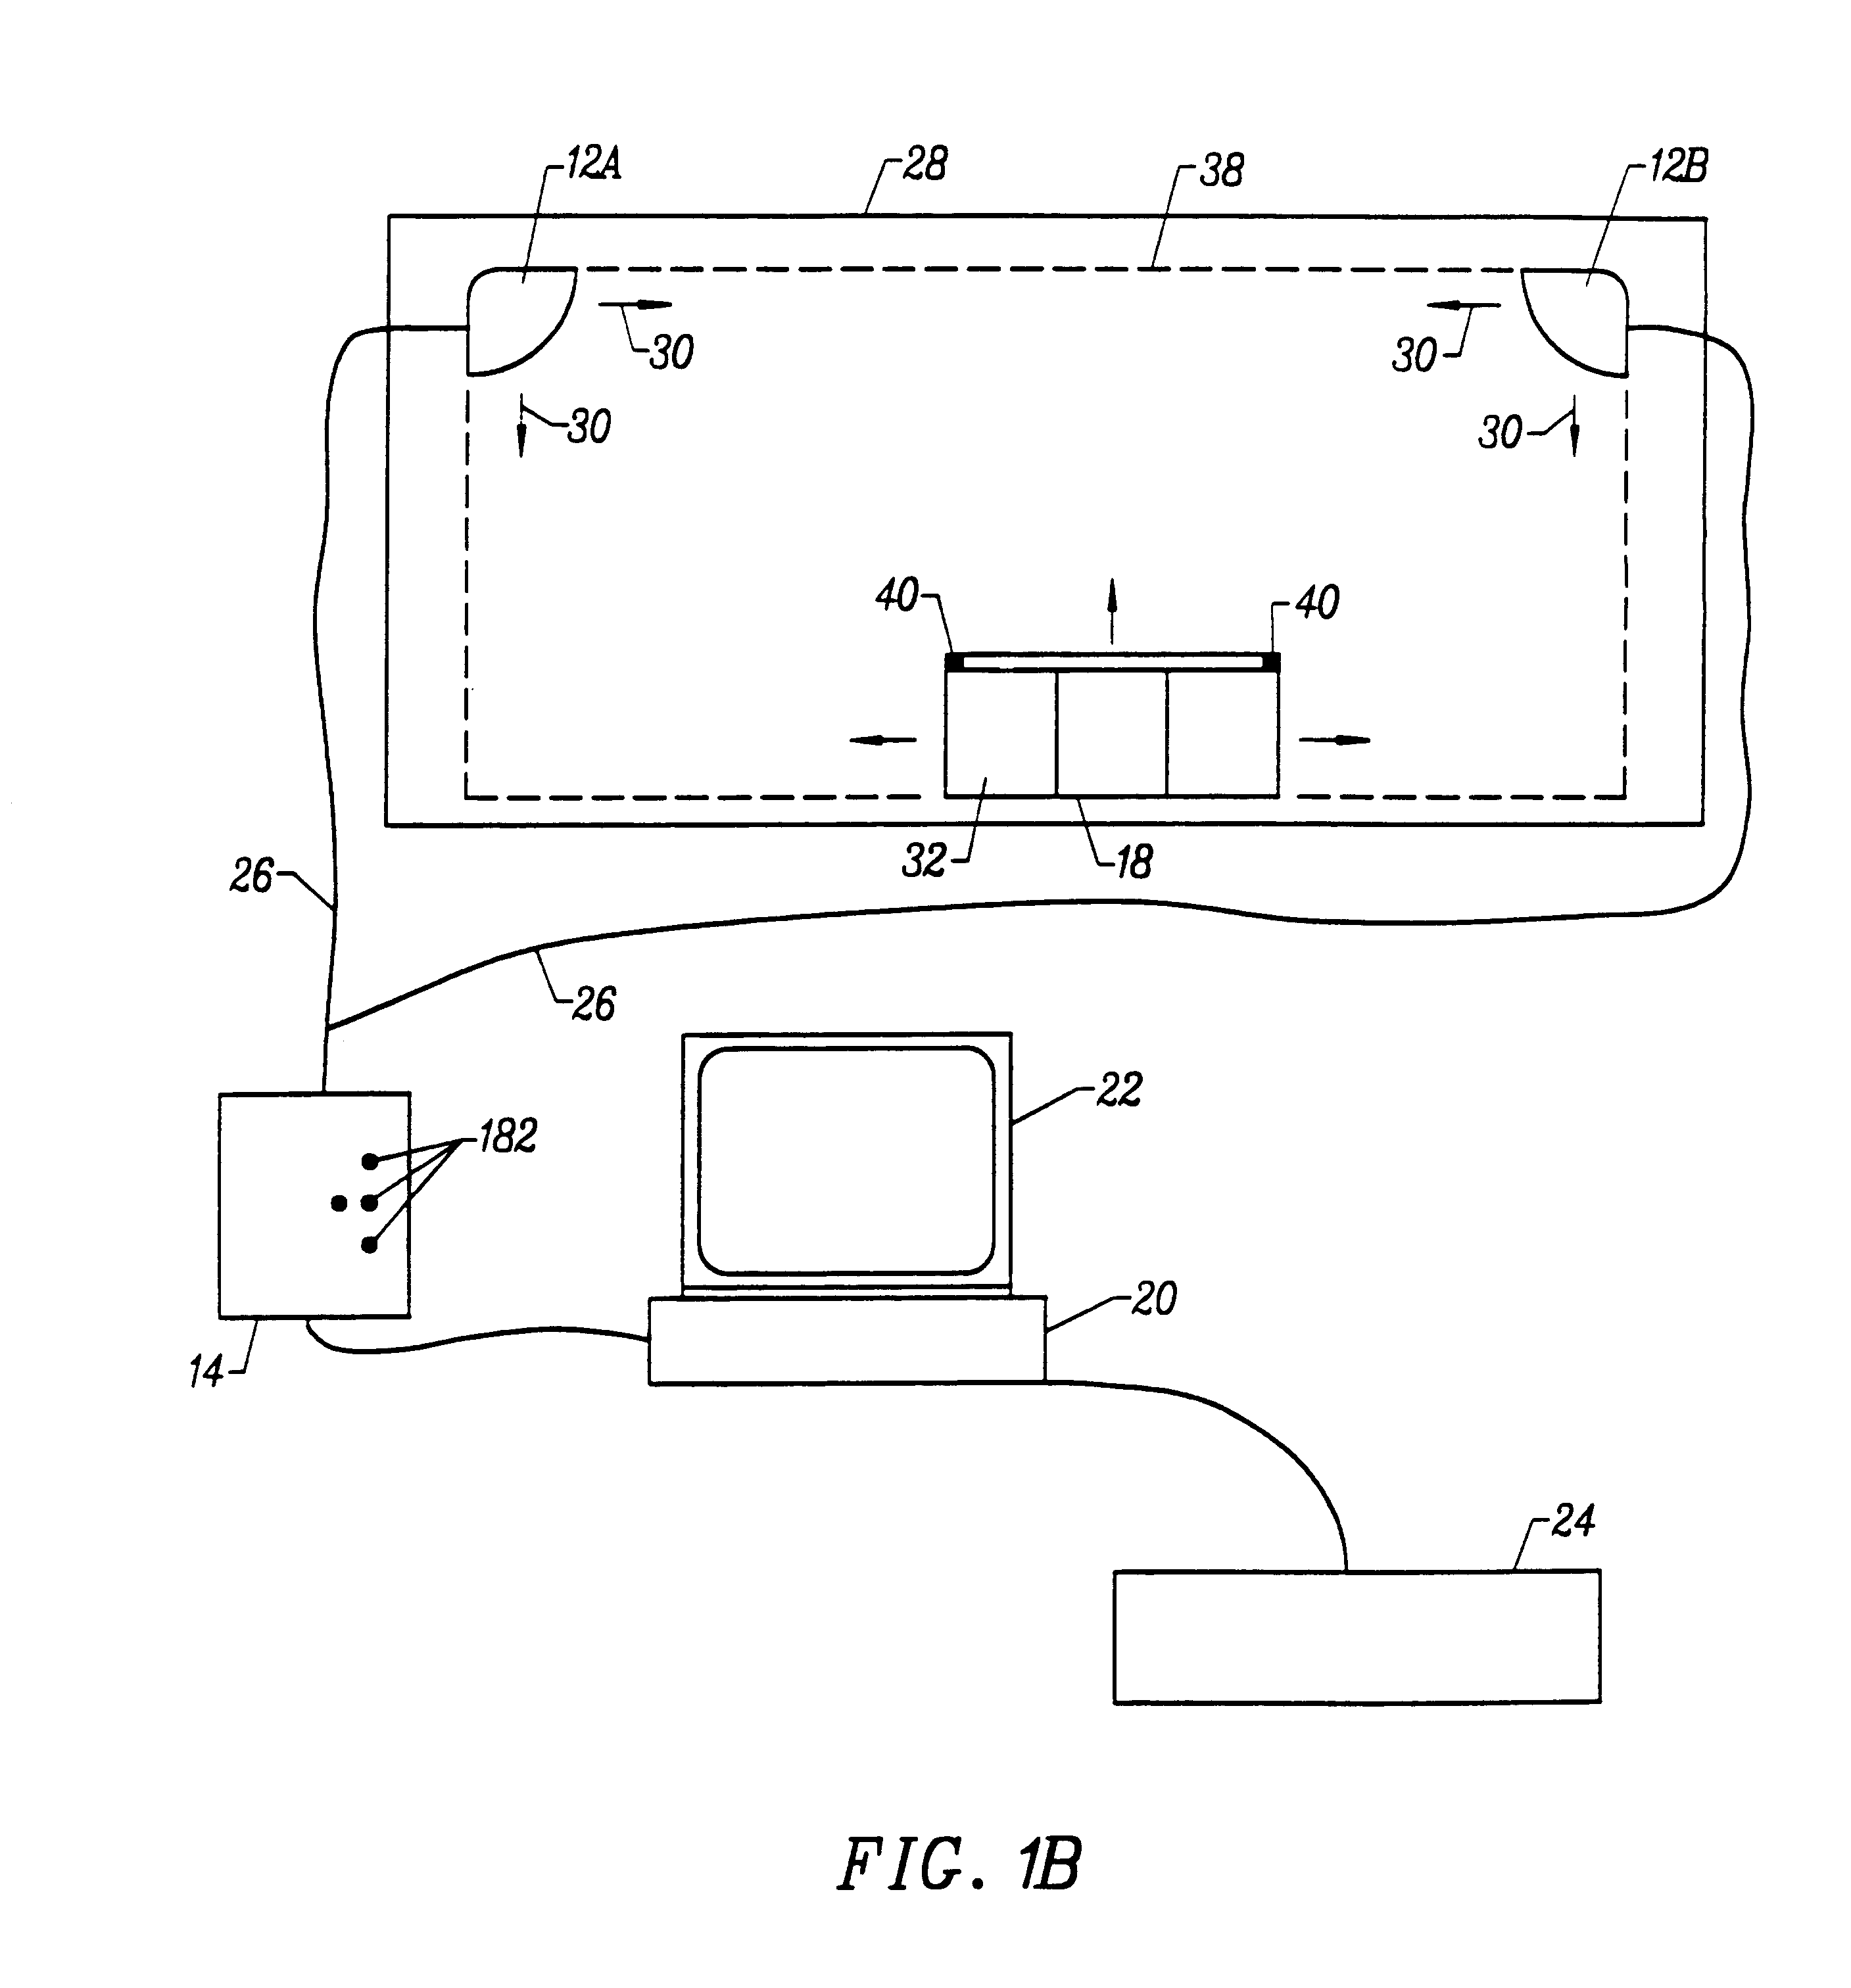 Method and software for enabling use of transcription system as a mouse